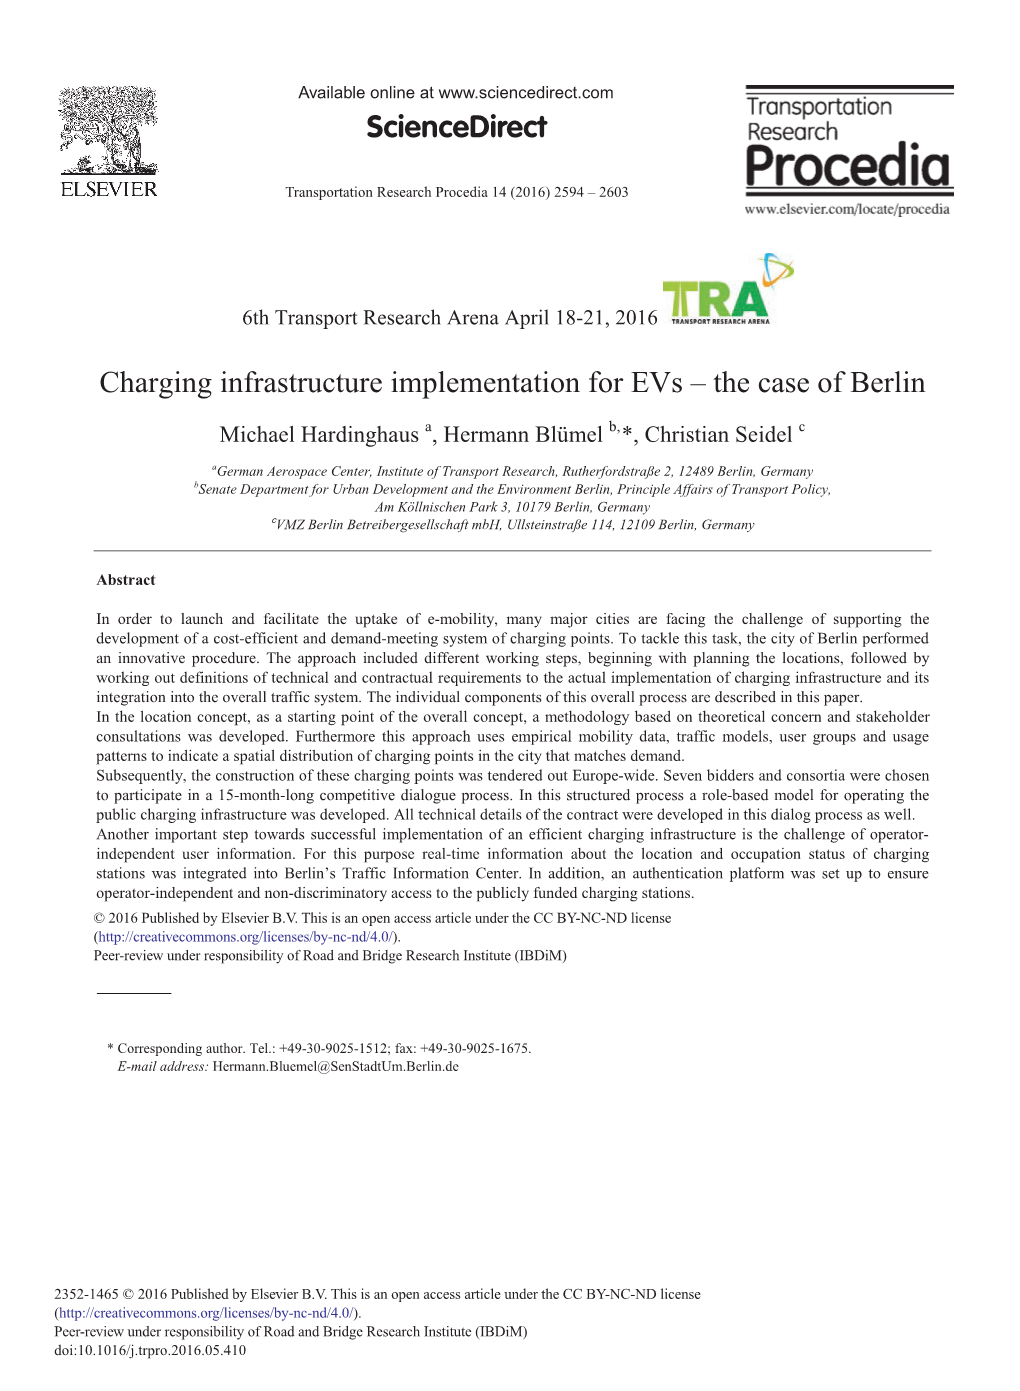 Charging Infrastructure Implementation for Evs – the Case of Berlin